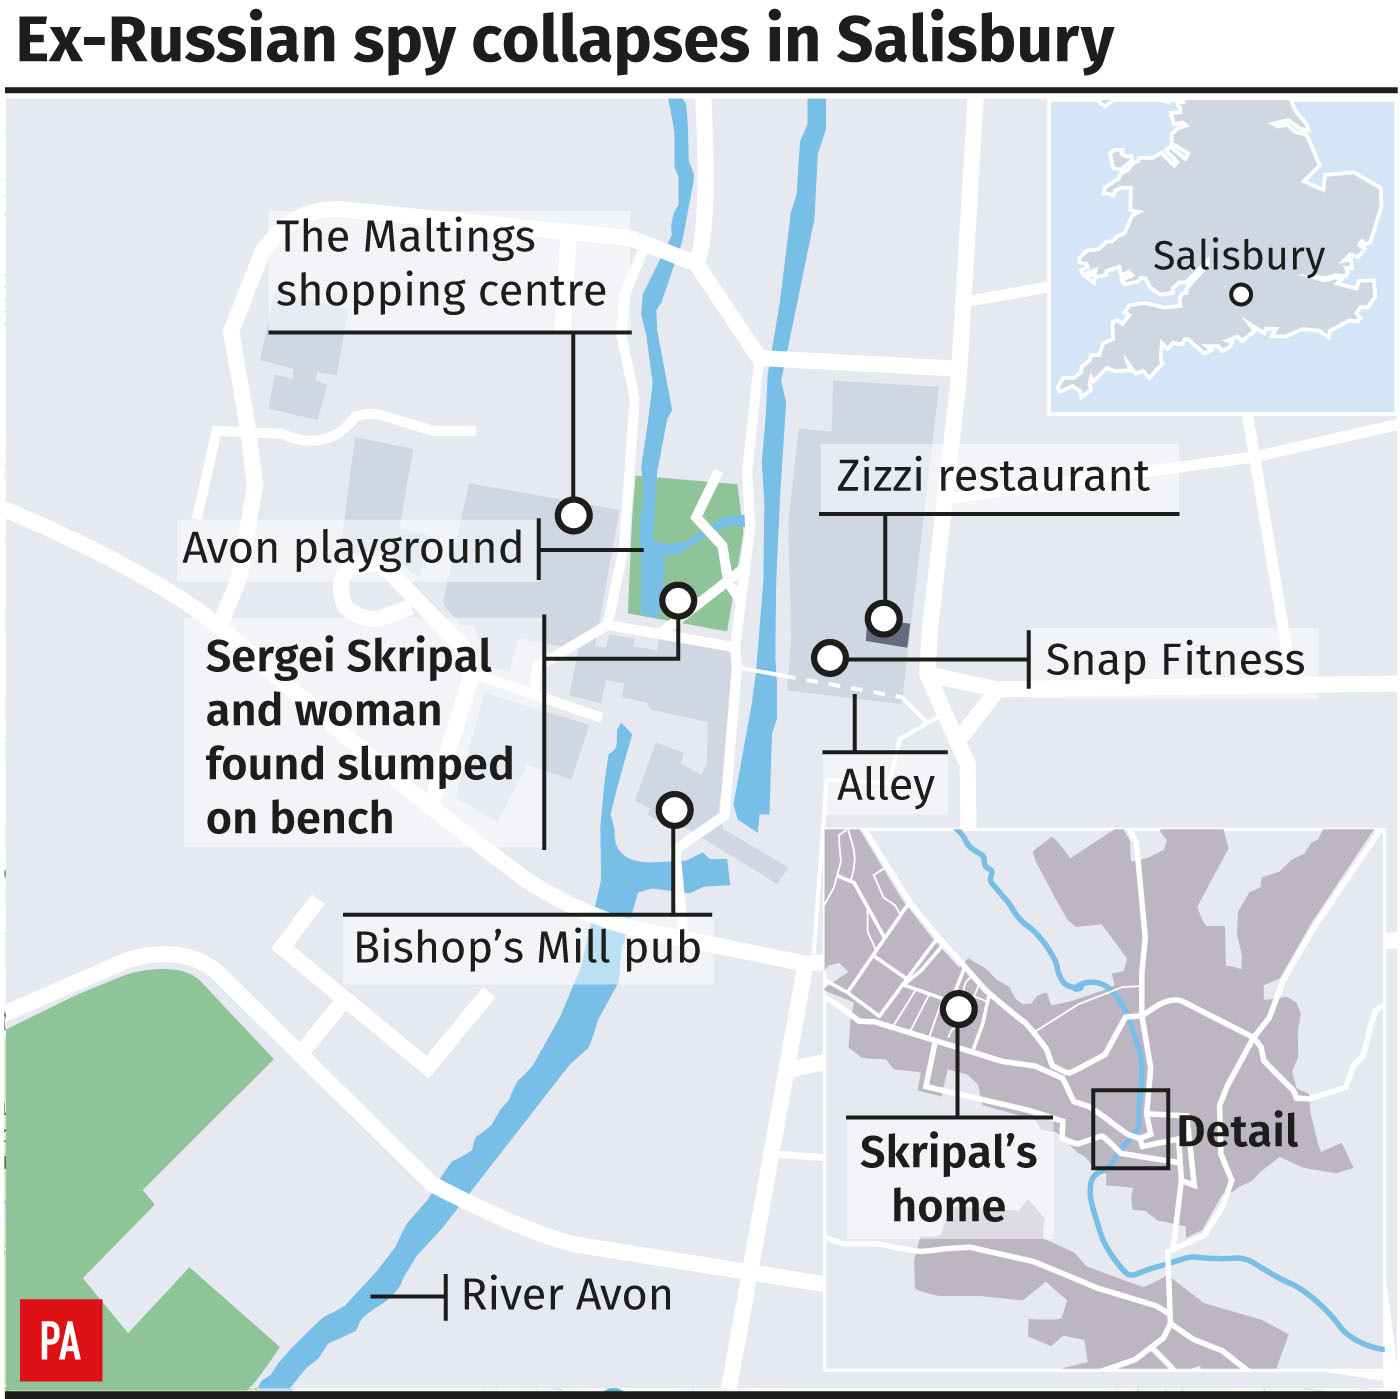 Ex-Russian spy collapses in Salisbury, graphic shows key locations